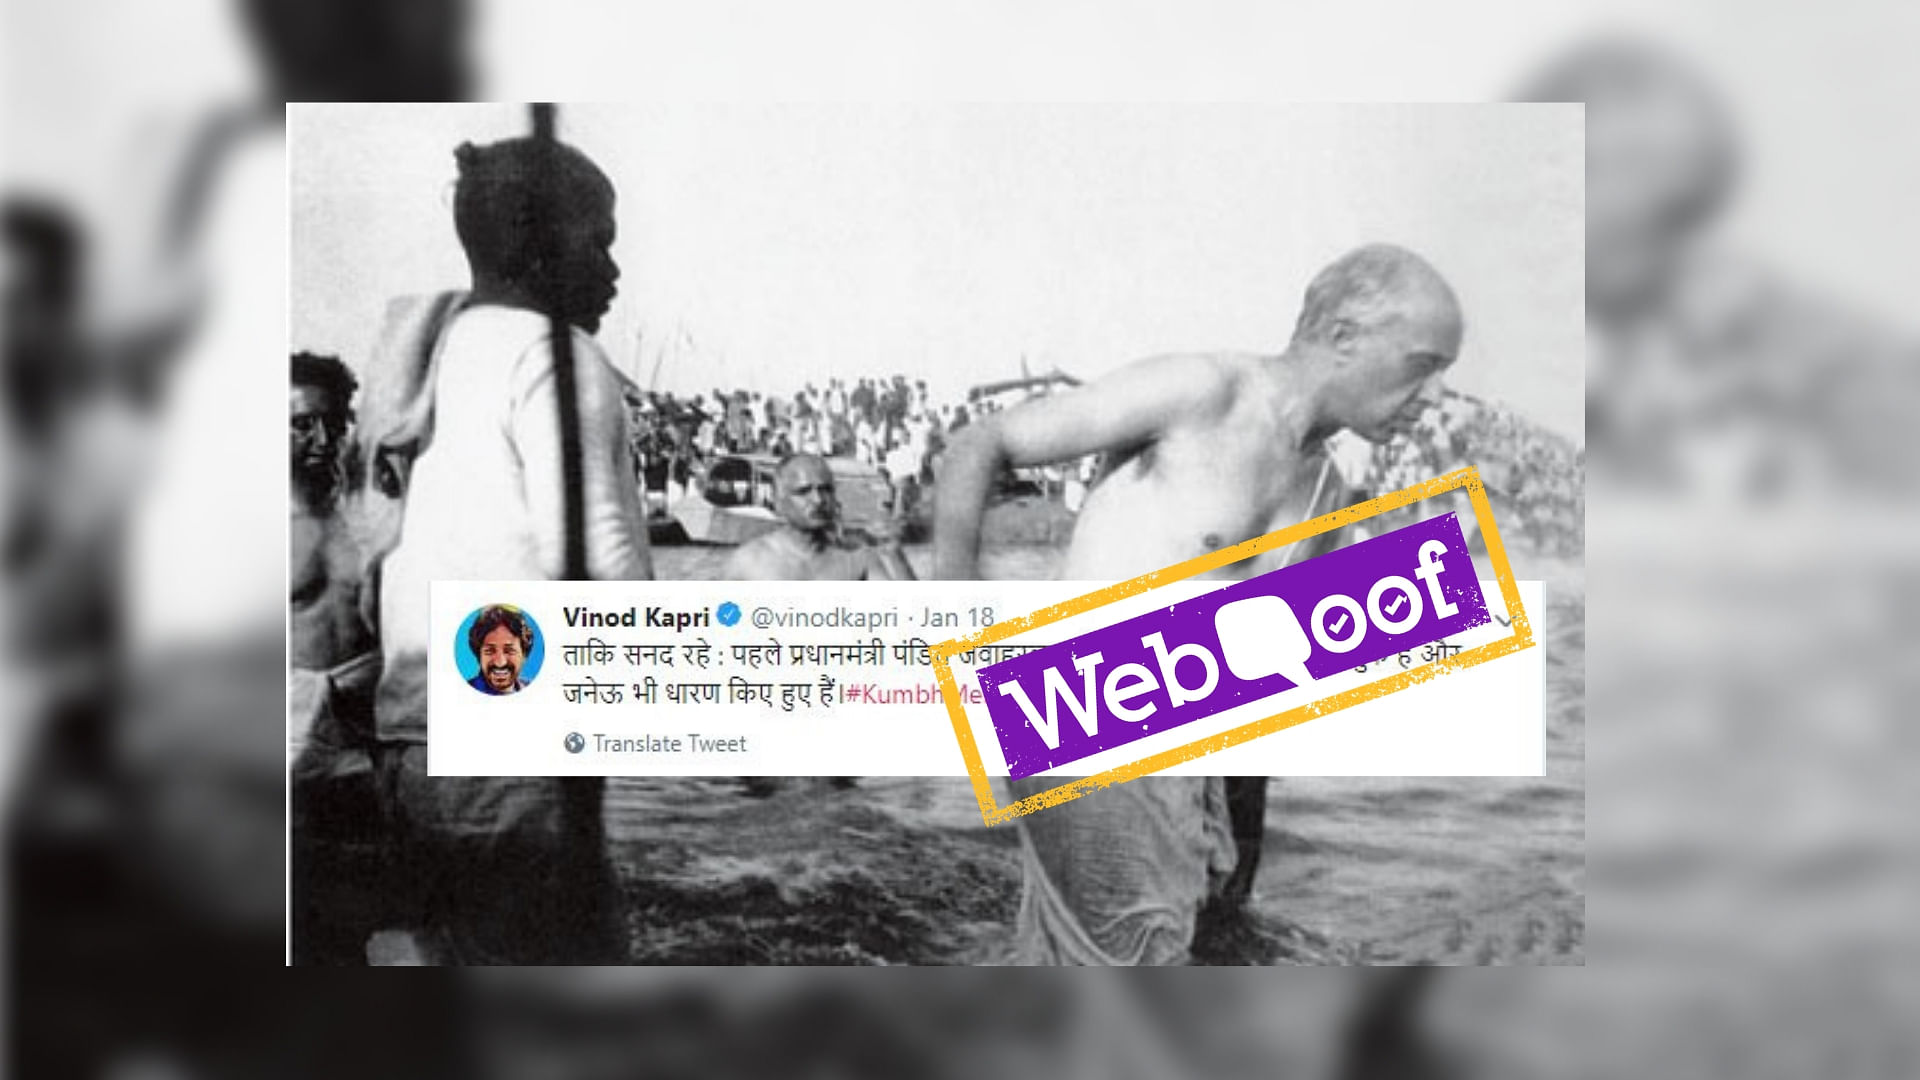 It is claimed that this photo photo of Jawaharlal Nehru was taken during Kumbh Mela while he was taking a holy dip.